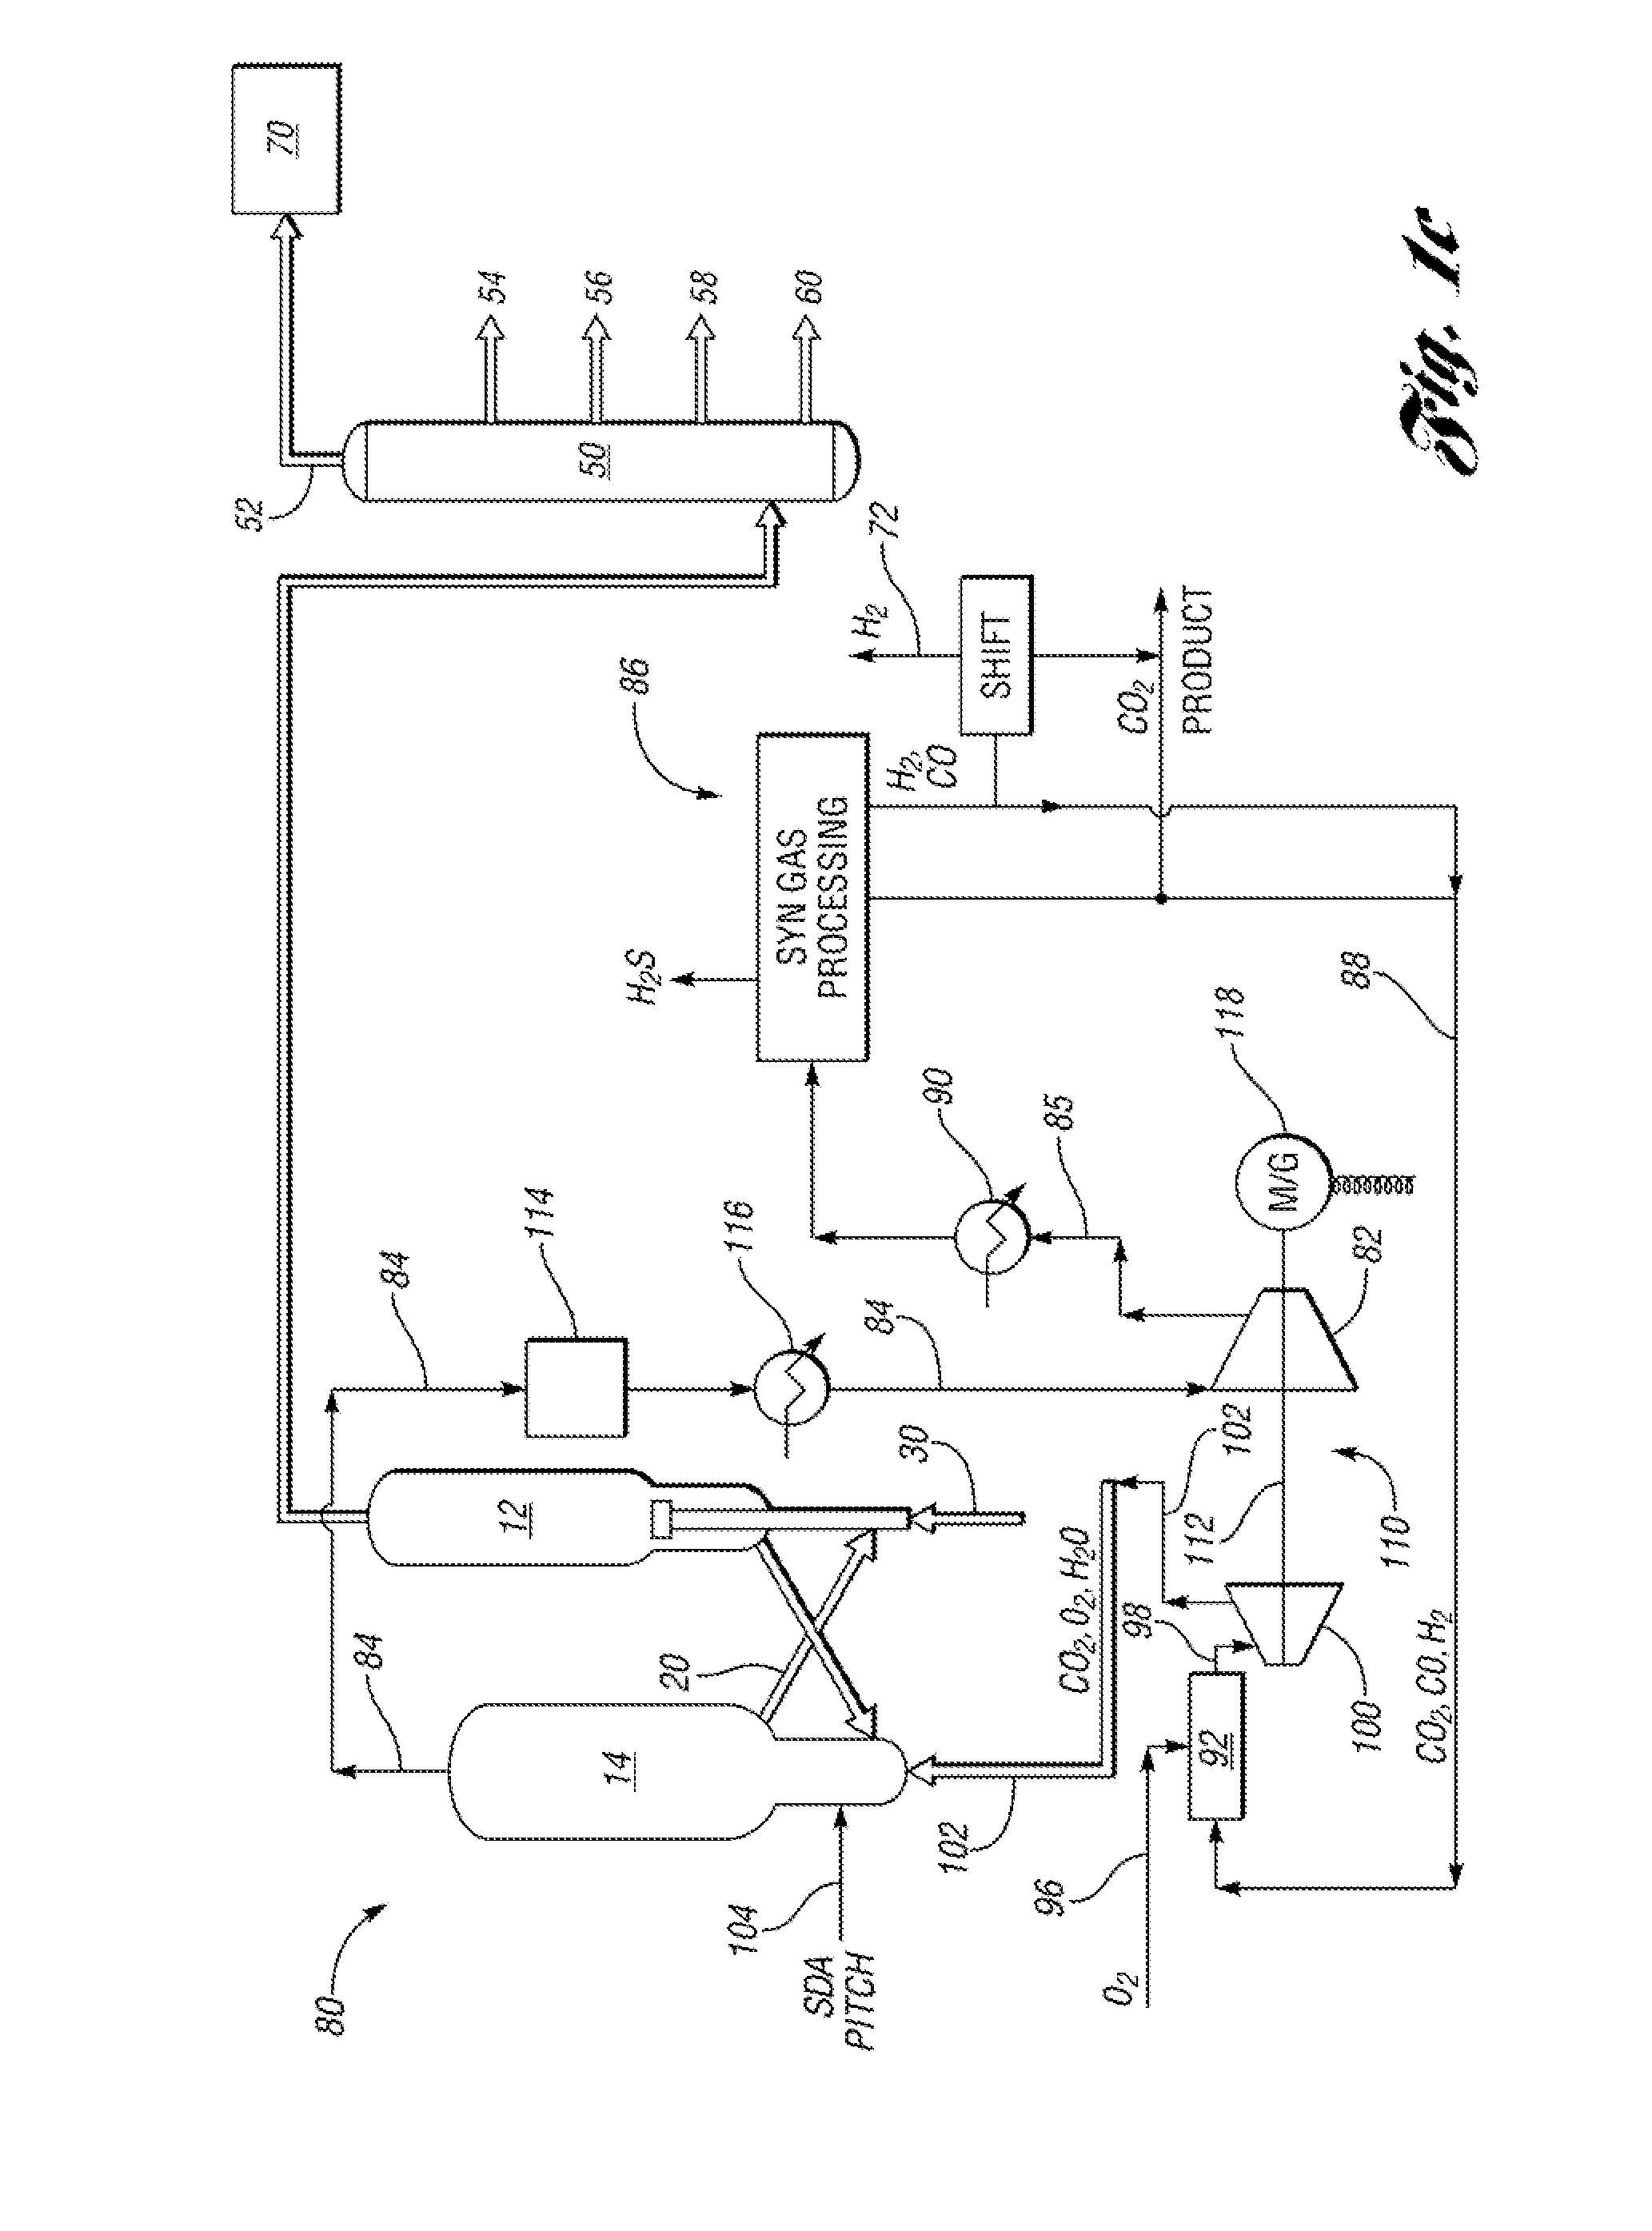 Method and system of heating a fluid catalytic cracking unit for overall CO2 reduction